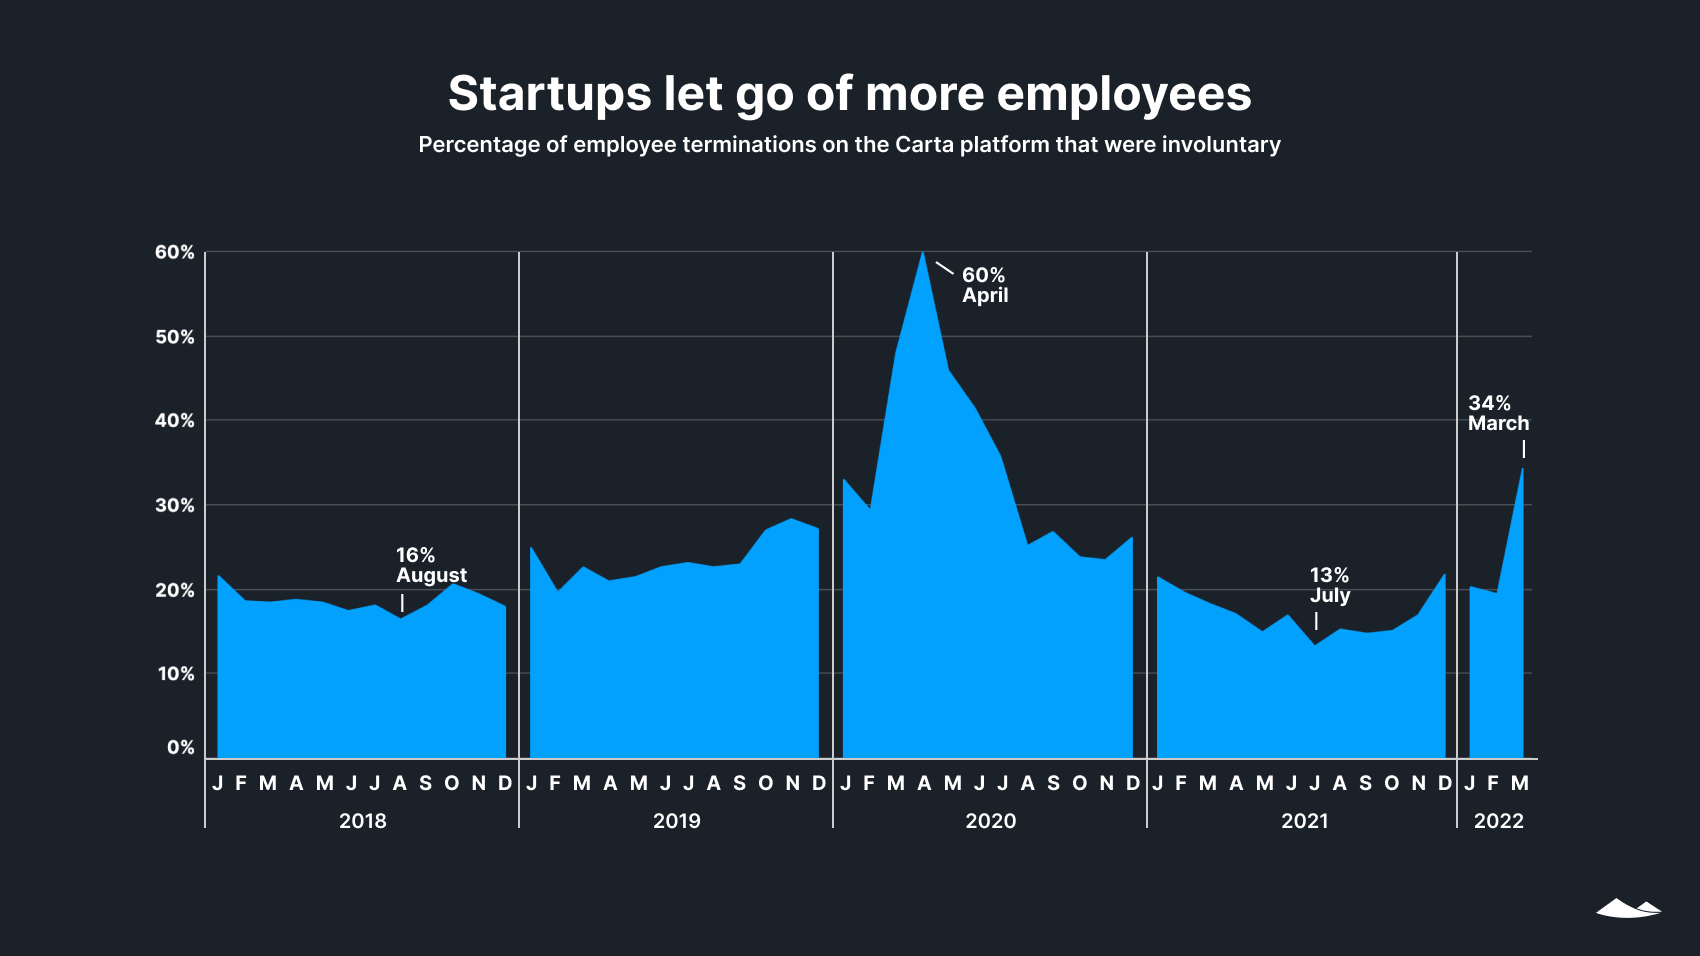 Startups are starting to let go of employees